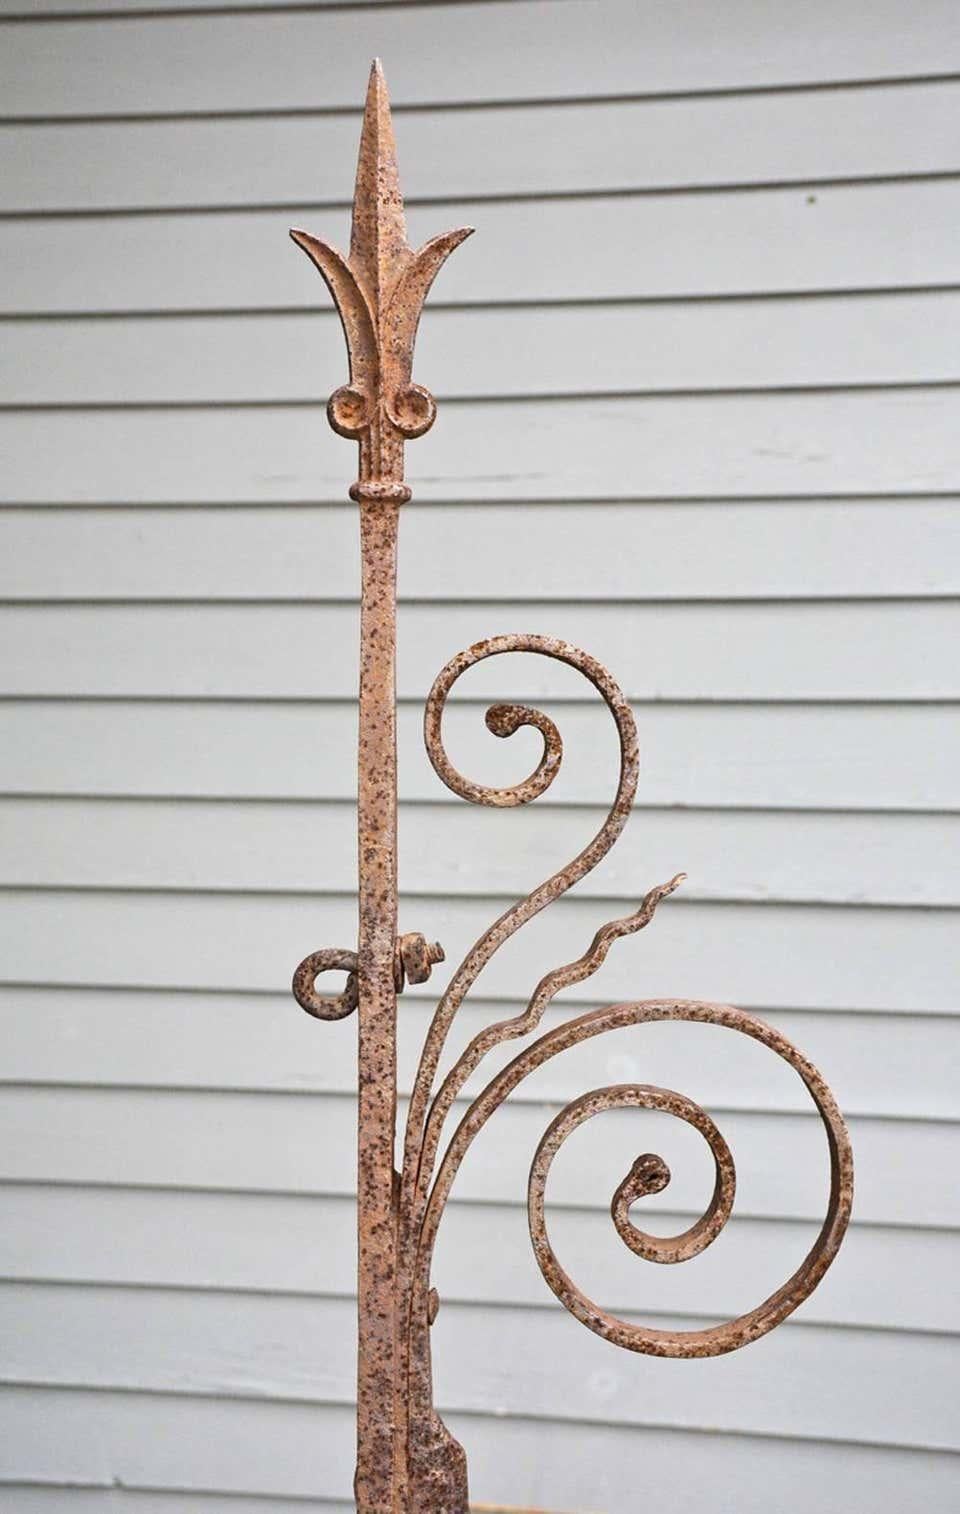 The antique wrought iron bracket is decorated with curls and a spear-like tip. Holes on the side bar can be used to secure to the side of a building. Sign can be attached to the horizontal bar for display.